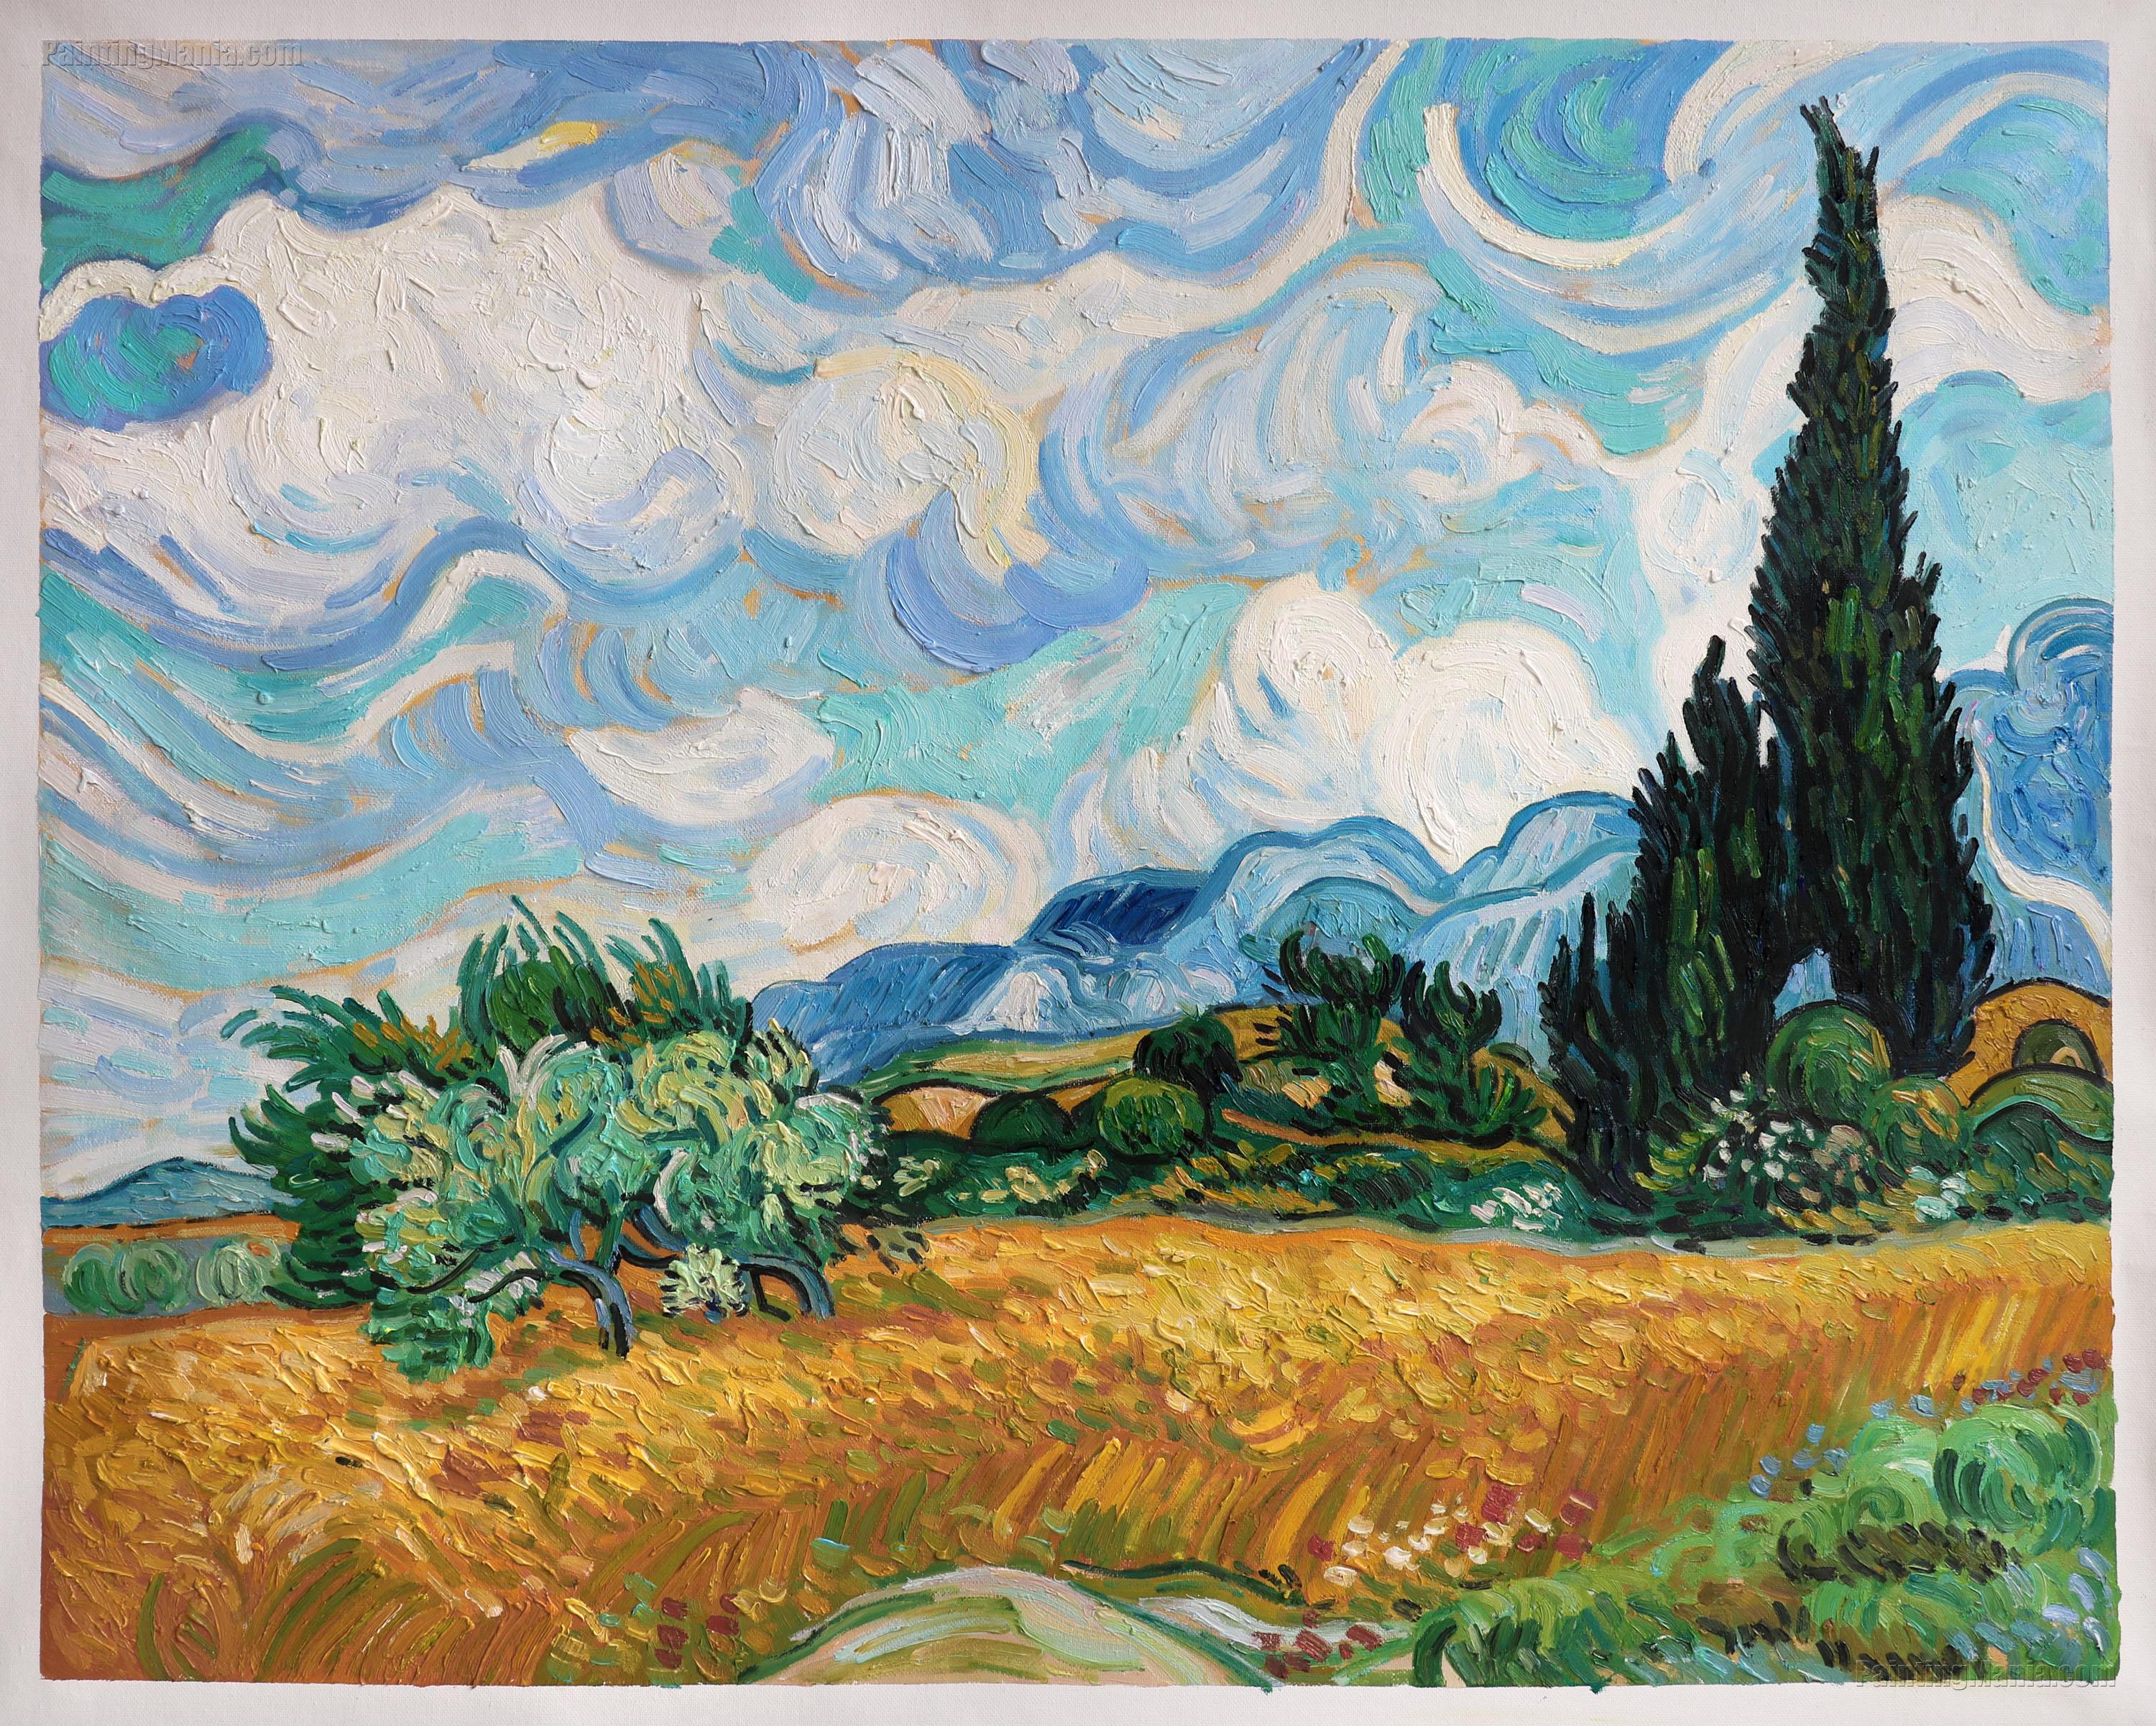 Wheat Field with Cypresses at the Haude Galline near Eygalieres